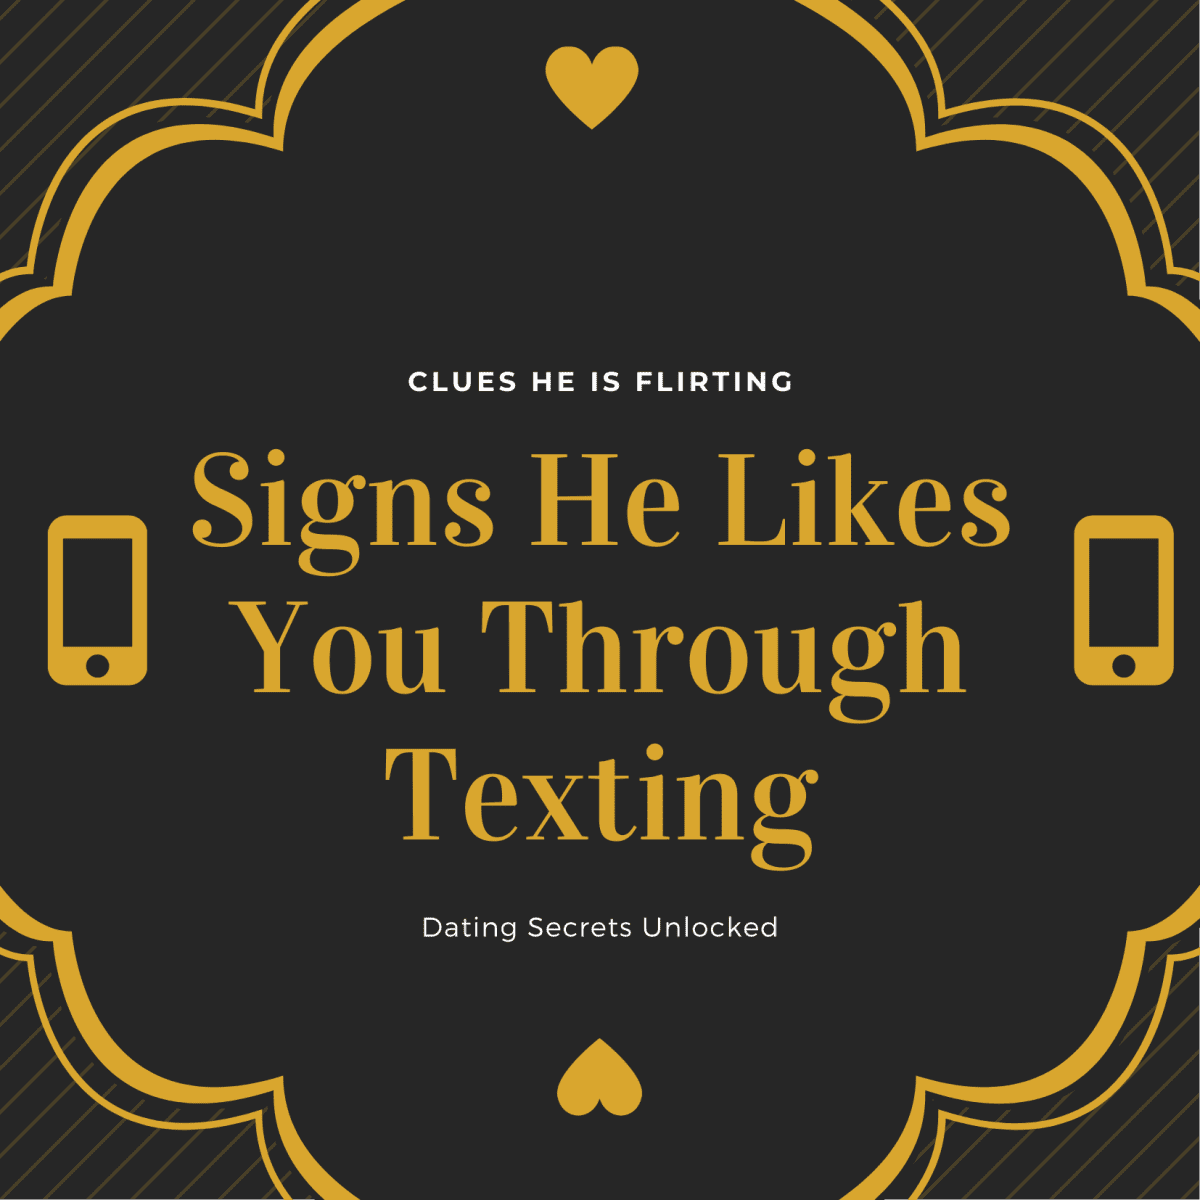 Signs He Likes You Through Texting - PairedLife